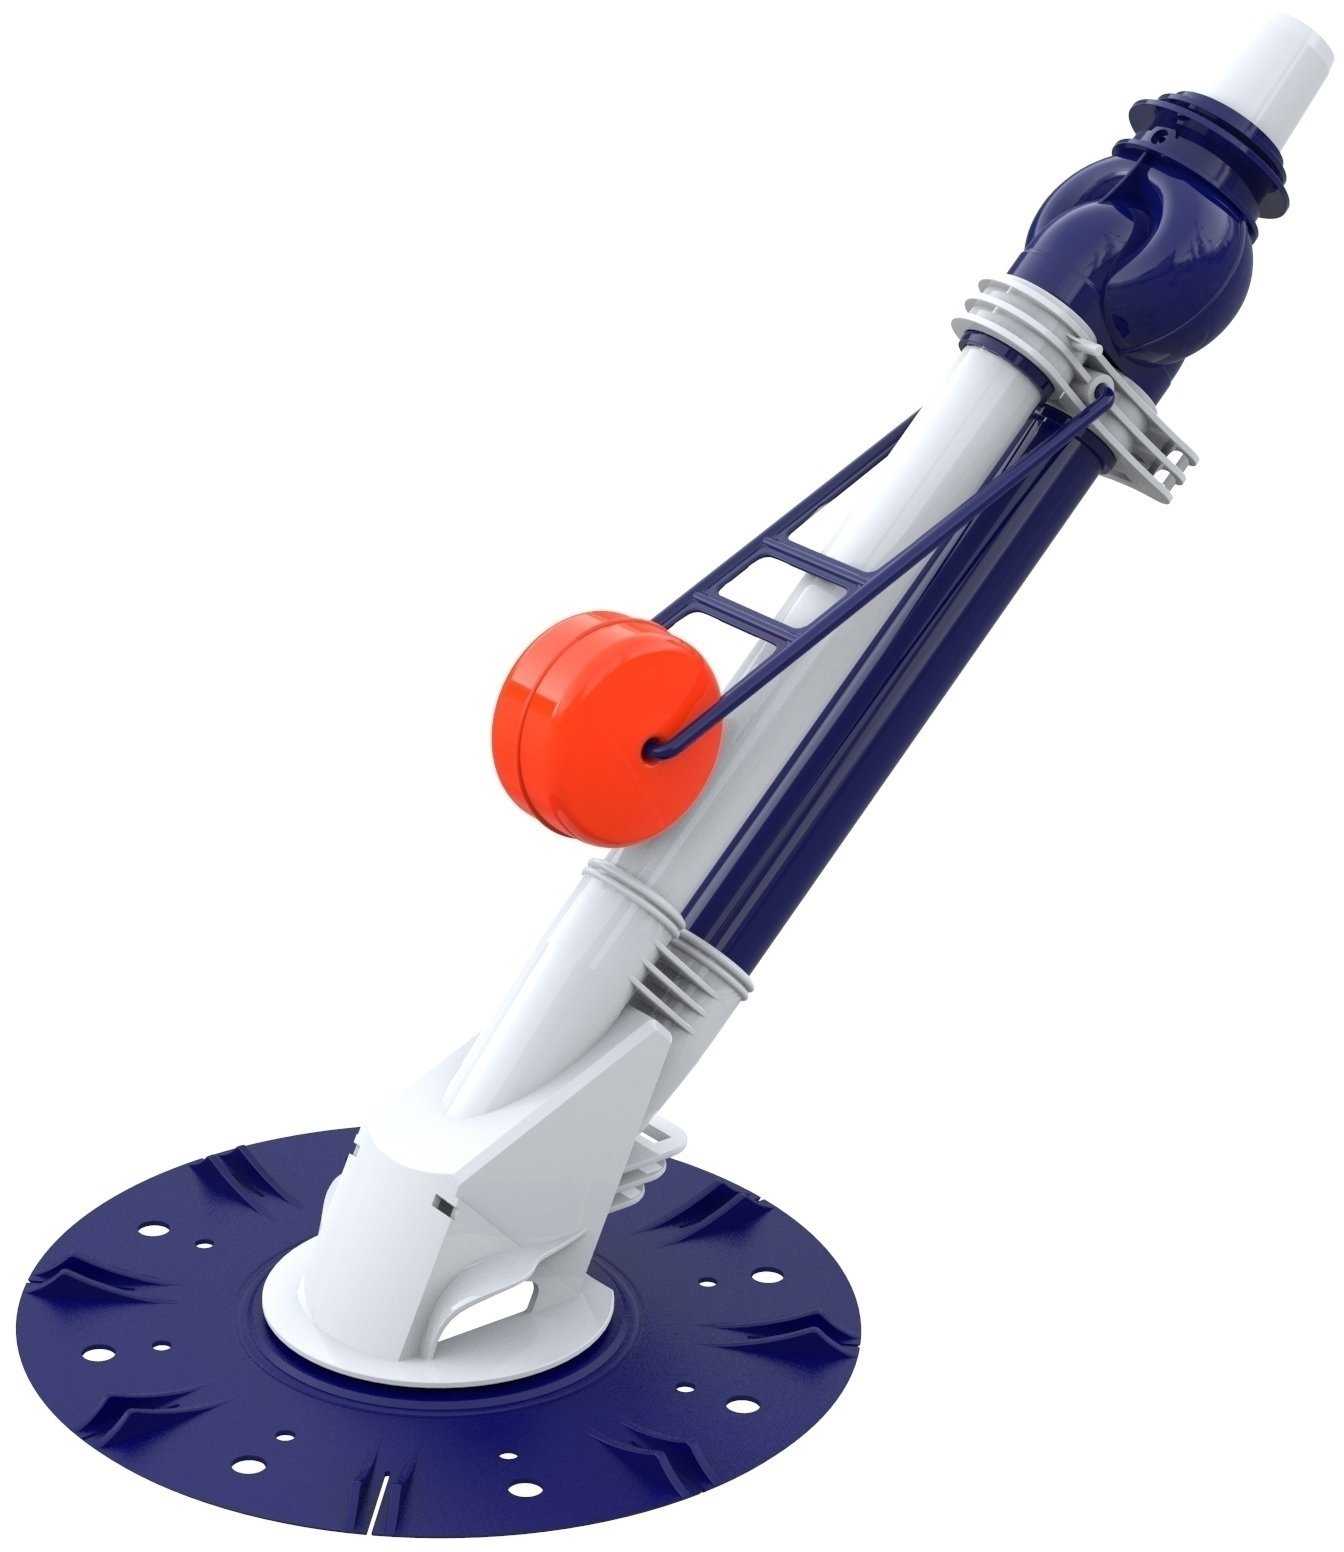 Cleaning the Pool Marimex ProStar Vac Smart vacuum cleaner